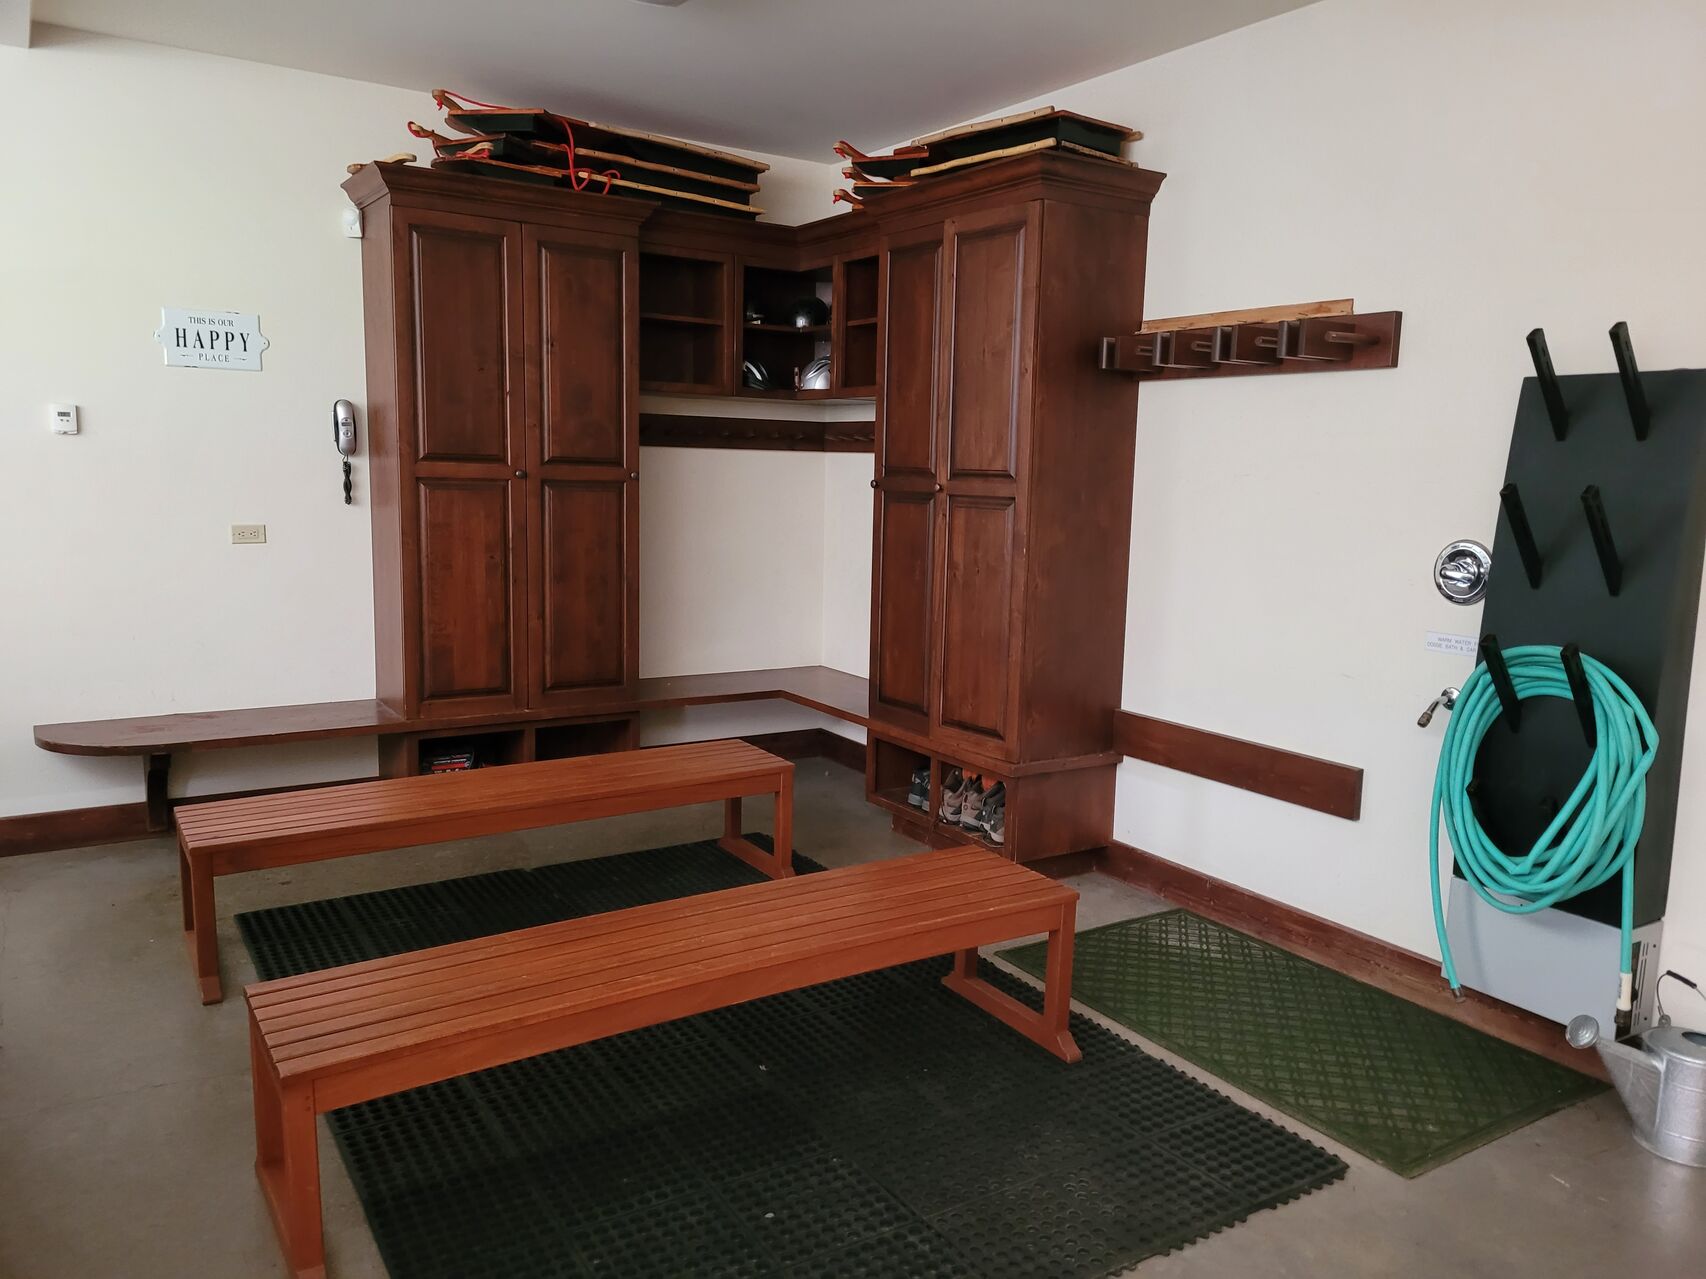 Room with two wood benches